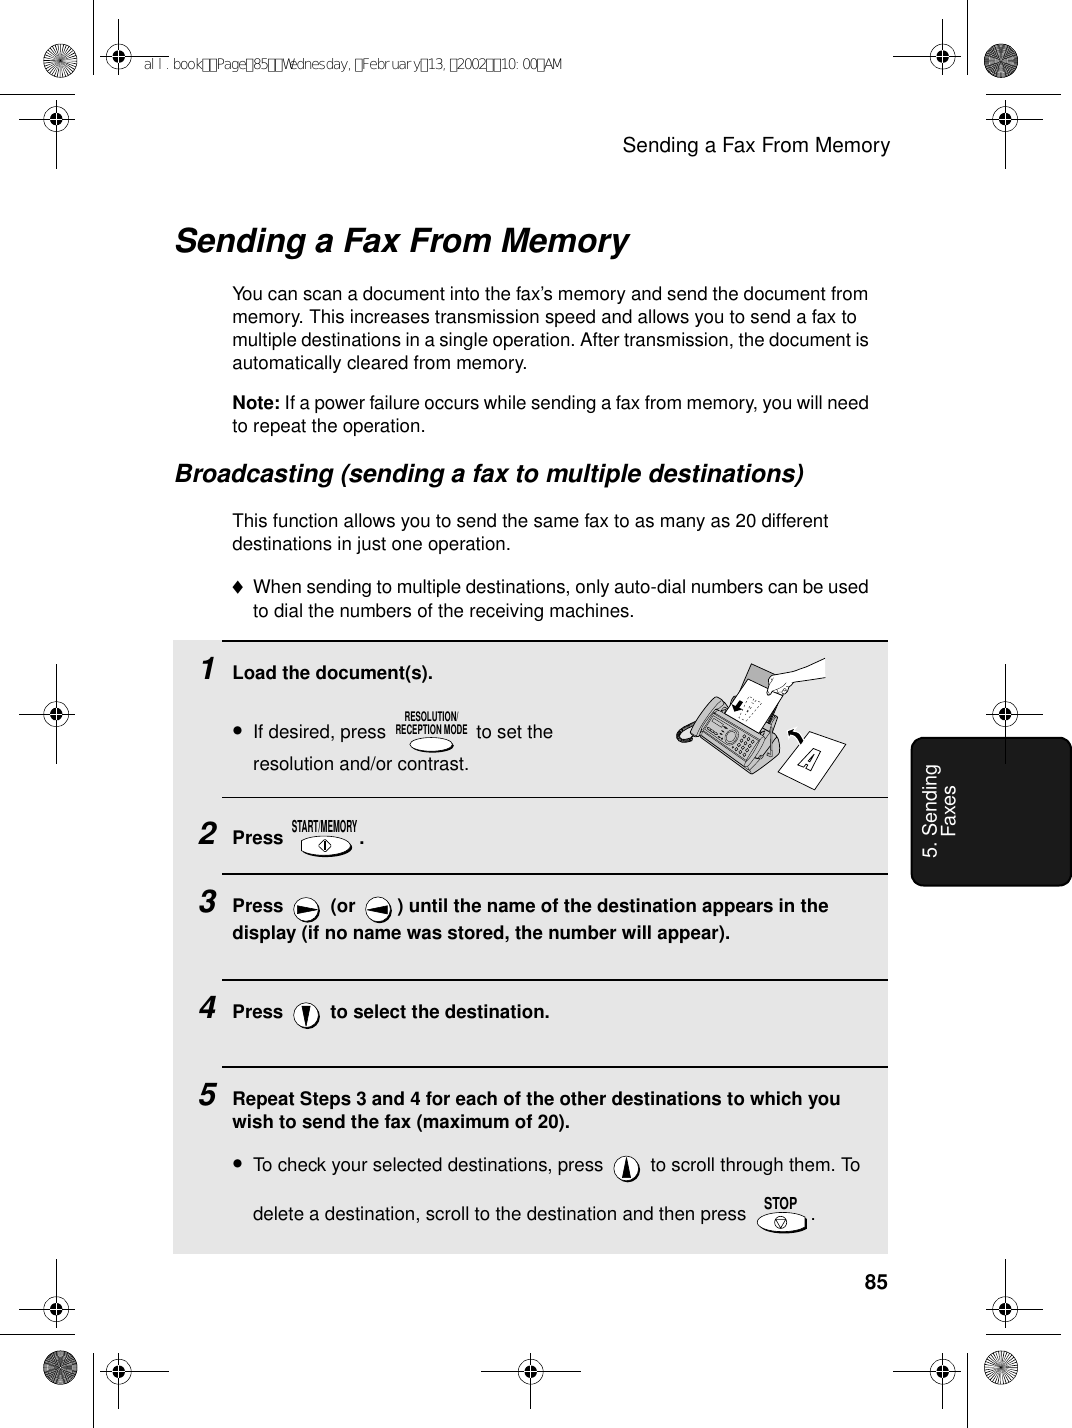 Sending a Fax From Memory855. Sending FaxesSending a Fax From MemoryYou can scan a document into the fax’s memory and send the document from memory. This increases transmission speed and allows you to send a fax to multiple destinations in a single operation. After transmission, the document is automatically cleared from memory.Note: If a power failure occurs while sending a fax from memory, you will need to repeat the operation.Broadcasting (sending a fax to multiple destinations)This function allows you to send the same fax to as many as 20 different destinations in just one operation. ♦When sending to multiple destinations, only auto-dial numbers can be used to dial the numbers of the receiving machines.1Load the document(s).•If desired, press   to set the resolution and/or contrast.2Press .3Press   (or  ) until the name of the destination appears in the display (if no name was stored, the number will appear).4Press   to select the destination.5Repeat Steps 3 and 4 for each of the other destinations to which you wish to send the fax (maximum of 20).•To check your selected destinations, press   to scroll through them. To delete a destination, scroll to the destination and then press  .  RESOLUTION/RECEPTION MODESTART/MEMORYSTOPall.bookPage85Wednesday,February13,200210:00AM